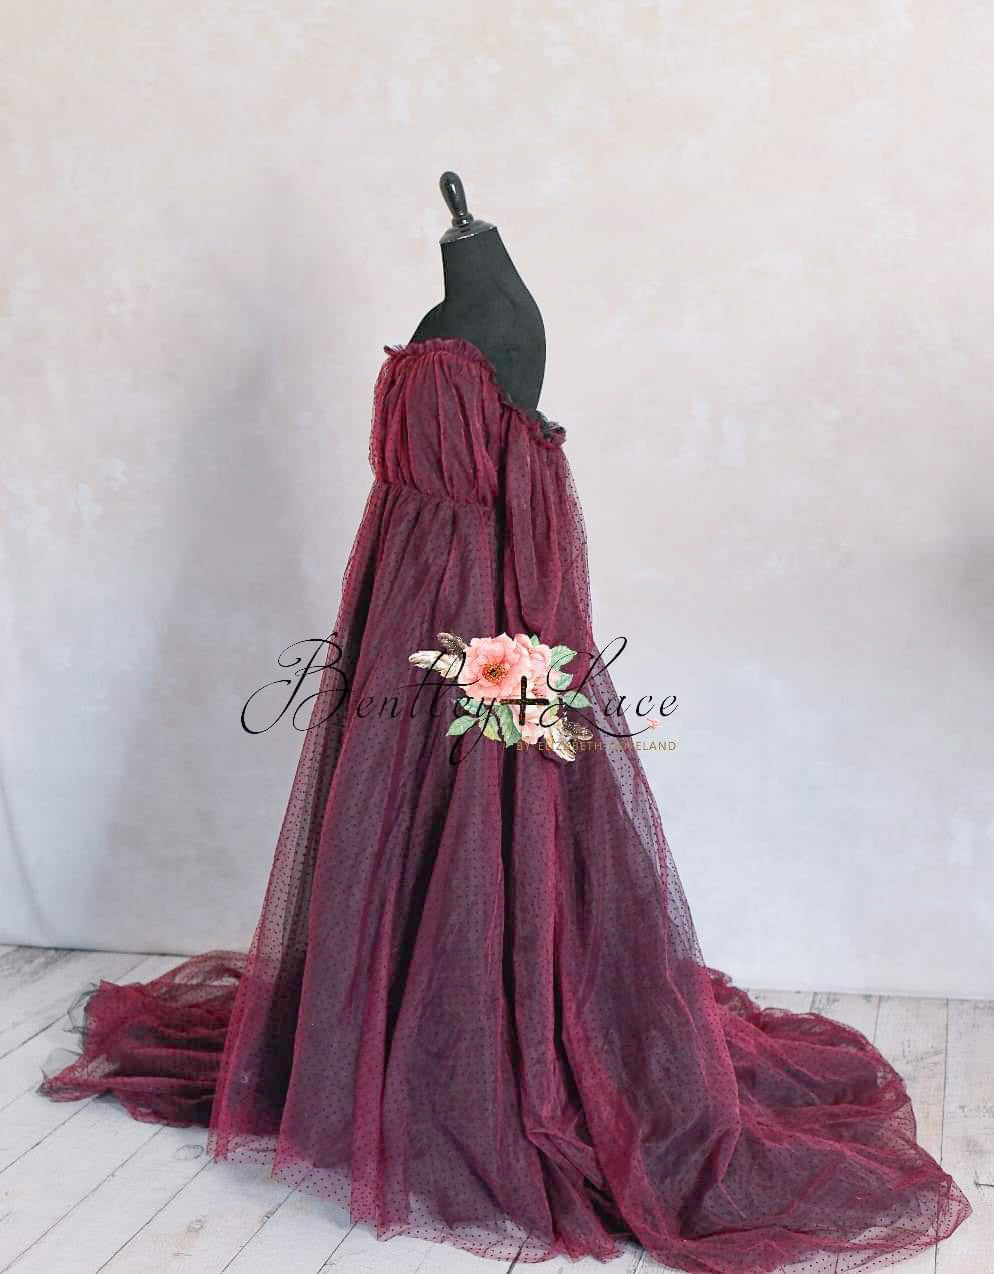 Emma tulle gown - Burgundy  (TEEN-ADULT)